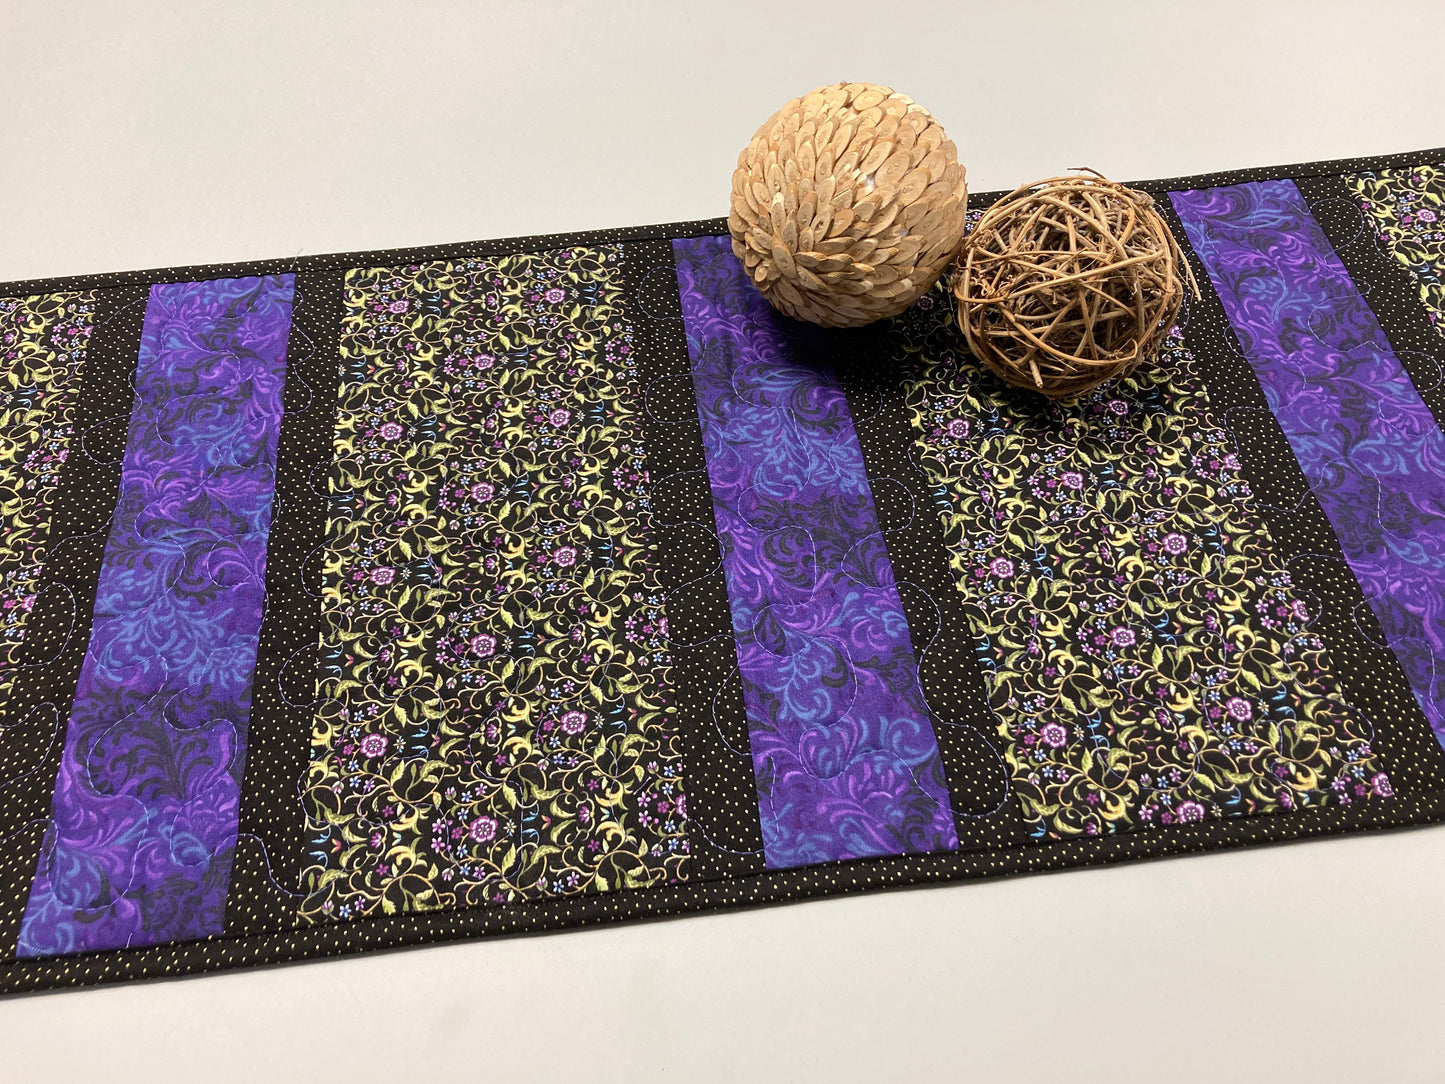 Quilted Table Runner, Purple Blue Gold Elegant Filigree, 13x52" Reversible Handmade Dining Coffee Table Centerpiece Everyday Summer Decor